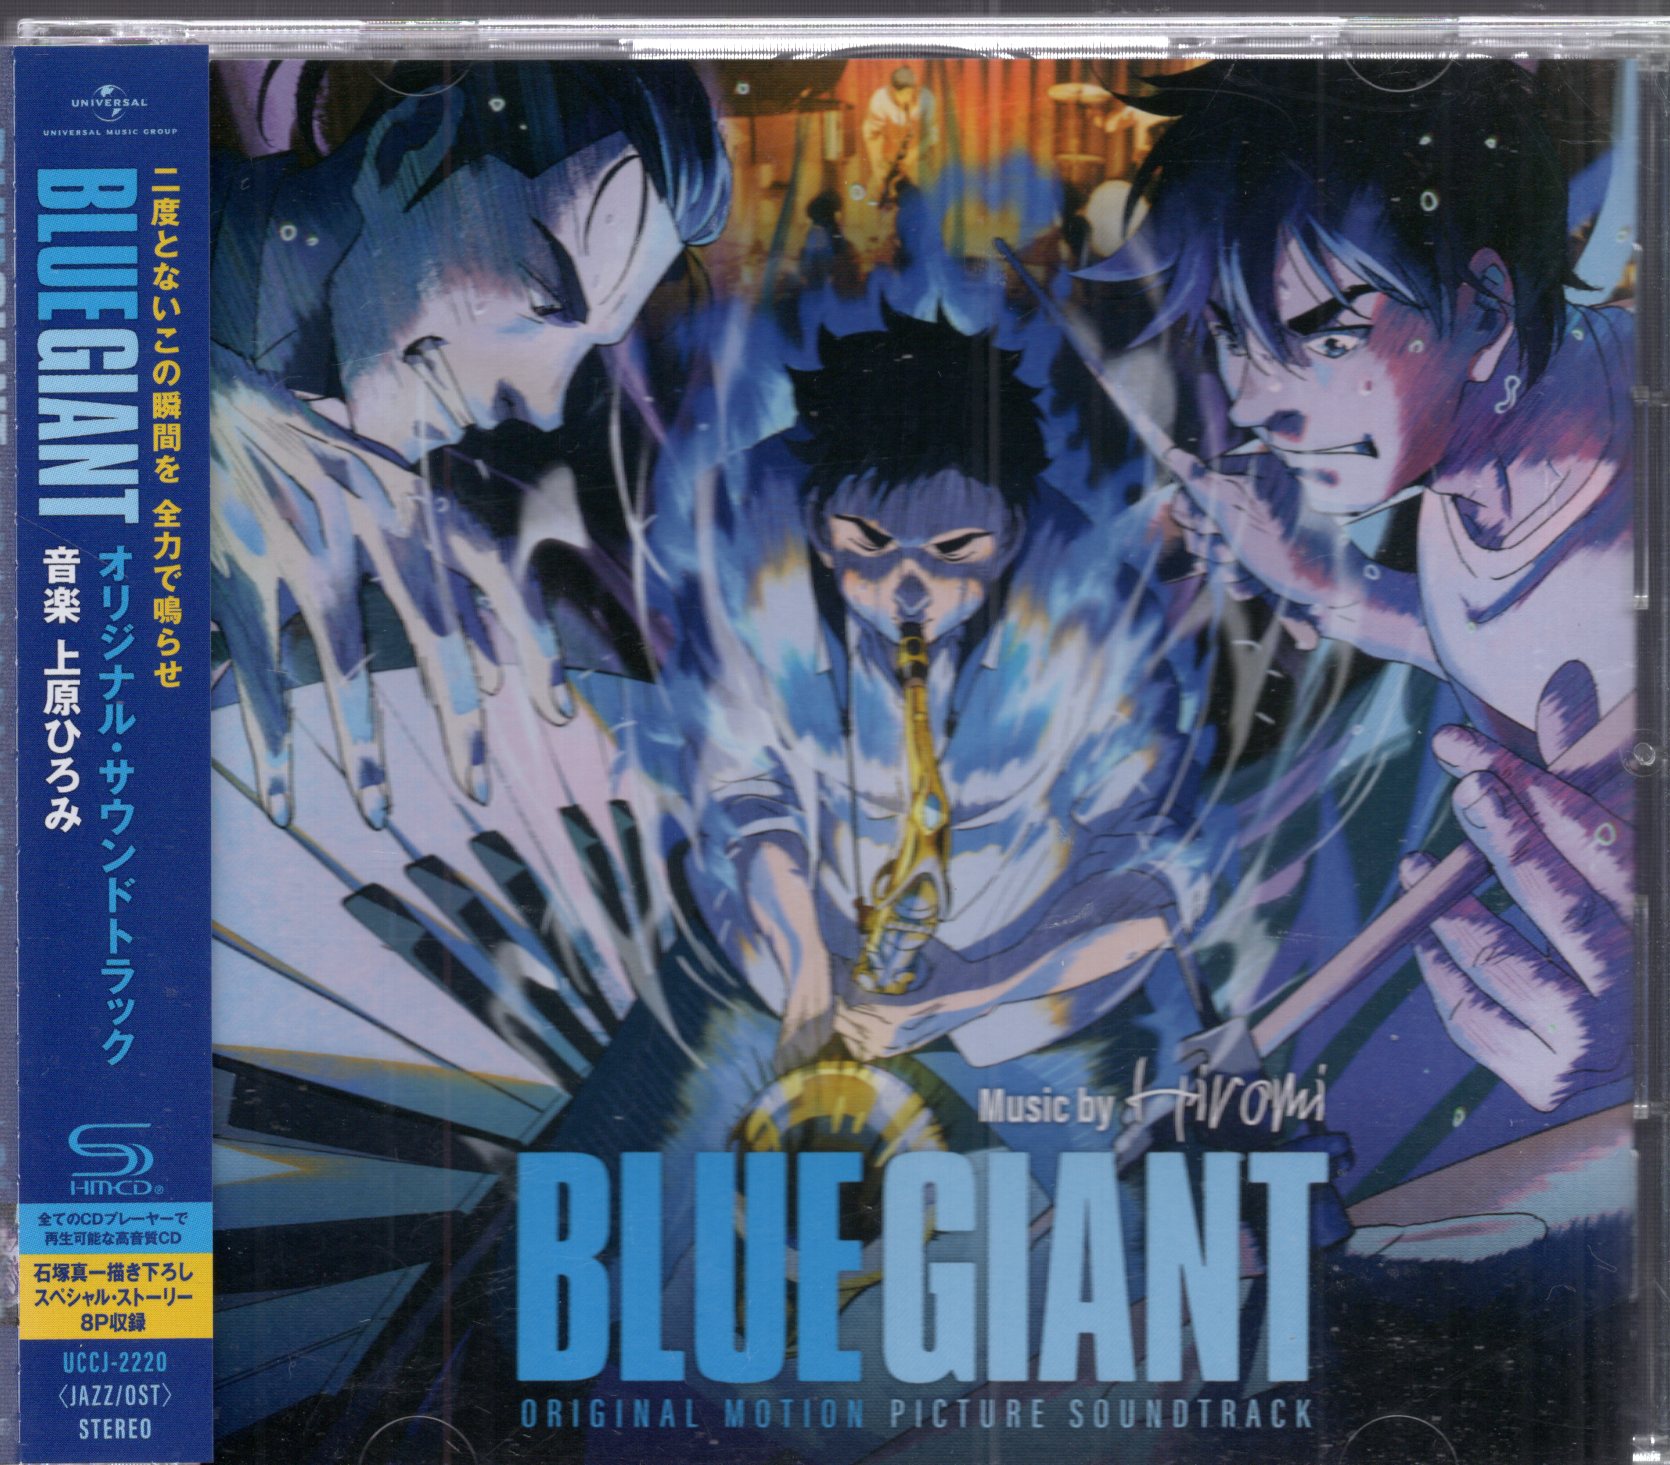 Blue Giant Jazz Manga Ends, But Sequel Series Begins in September - News -  Anime News Network